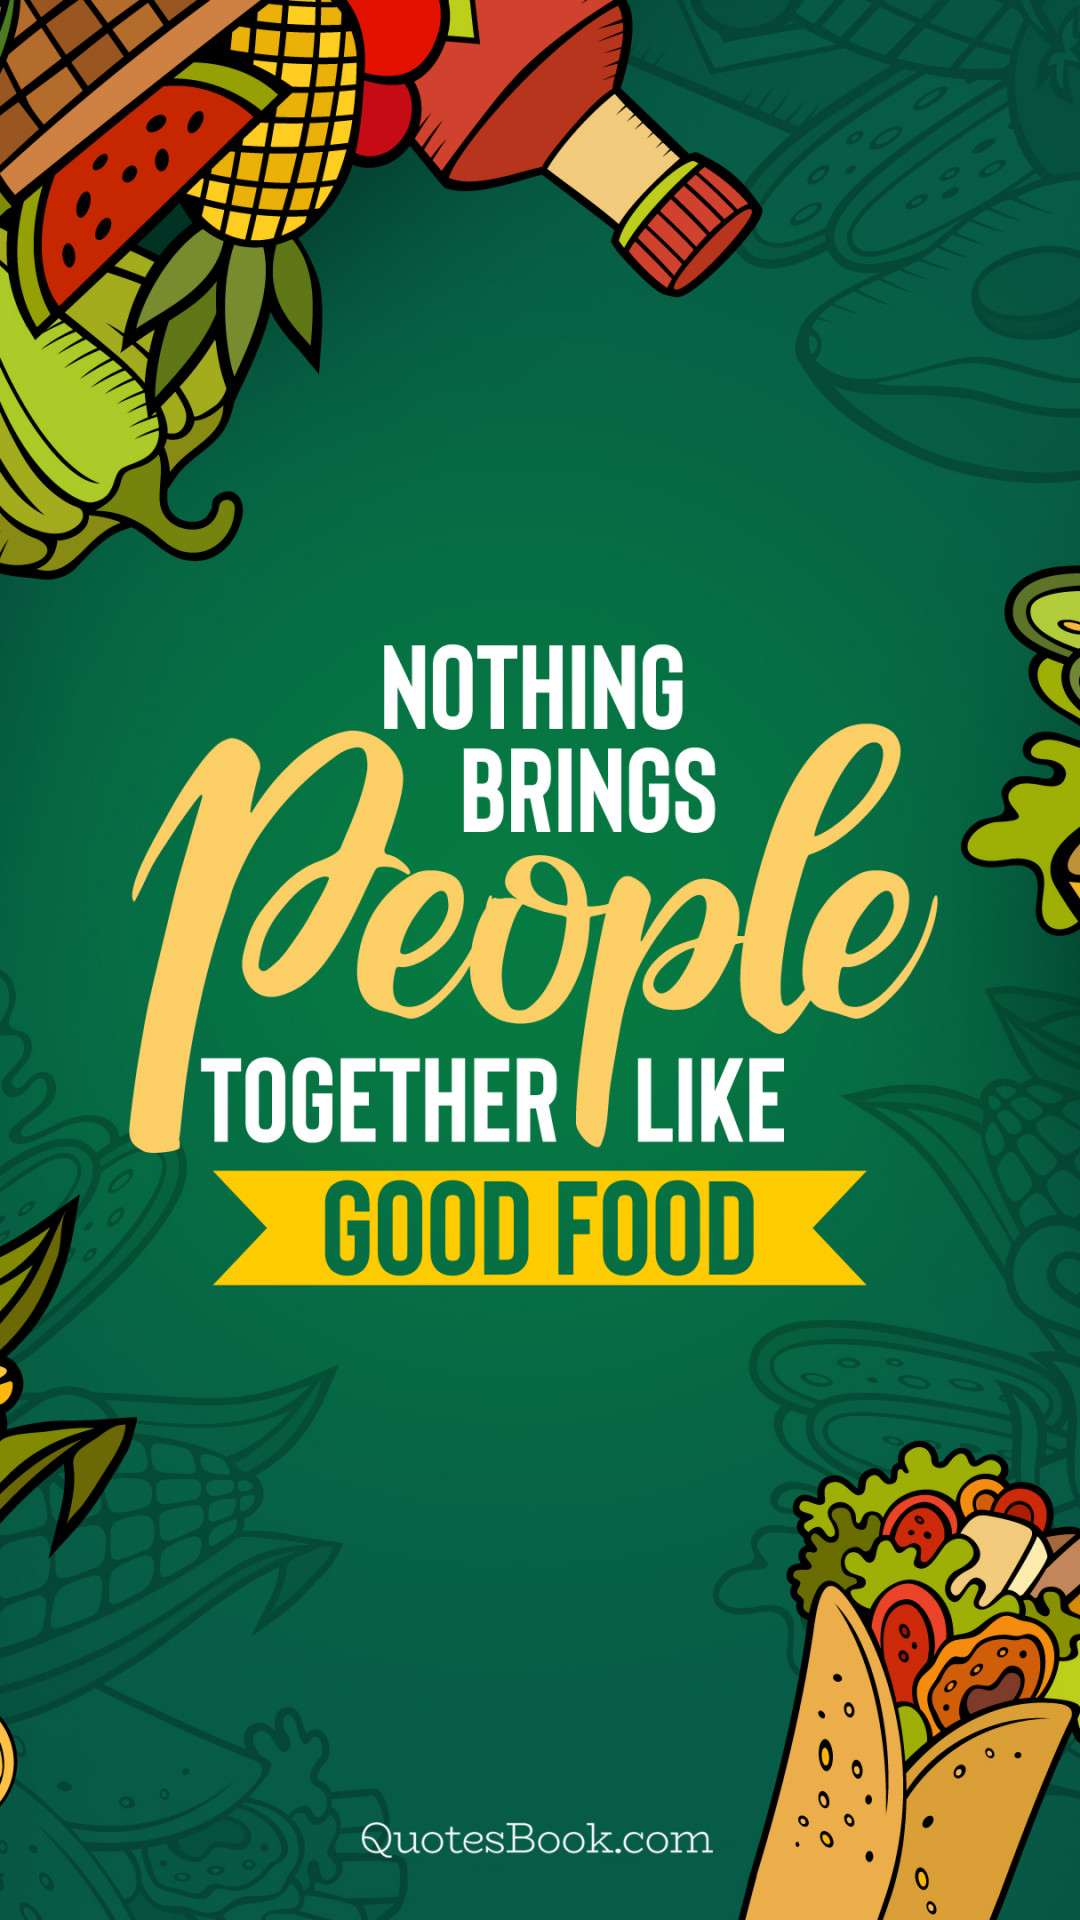 Nothing brings people together like good food - QuotesBook